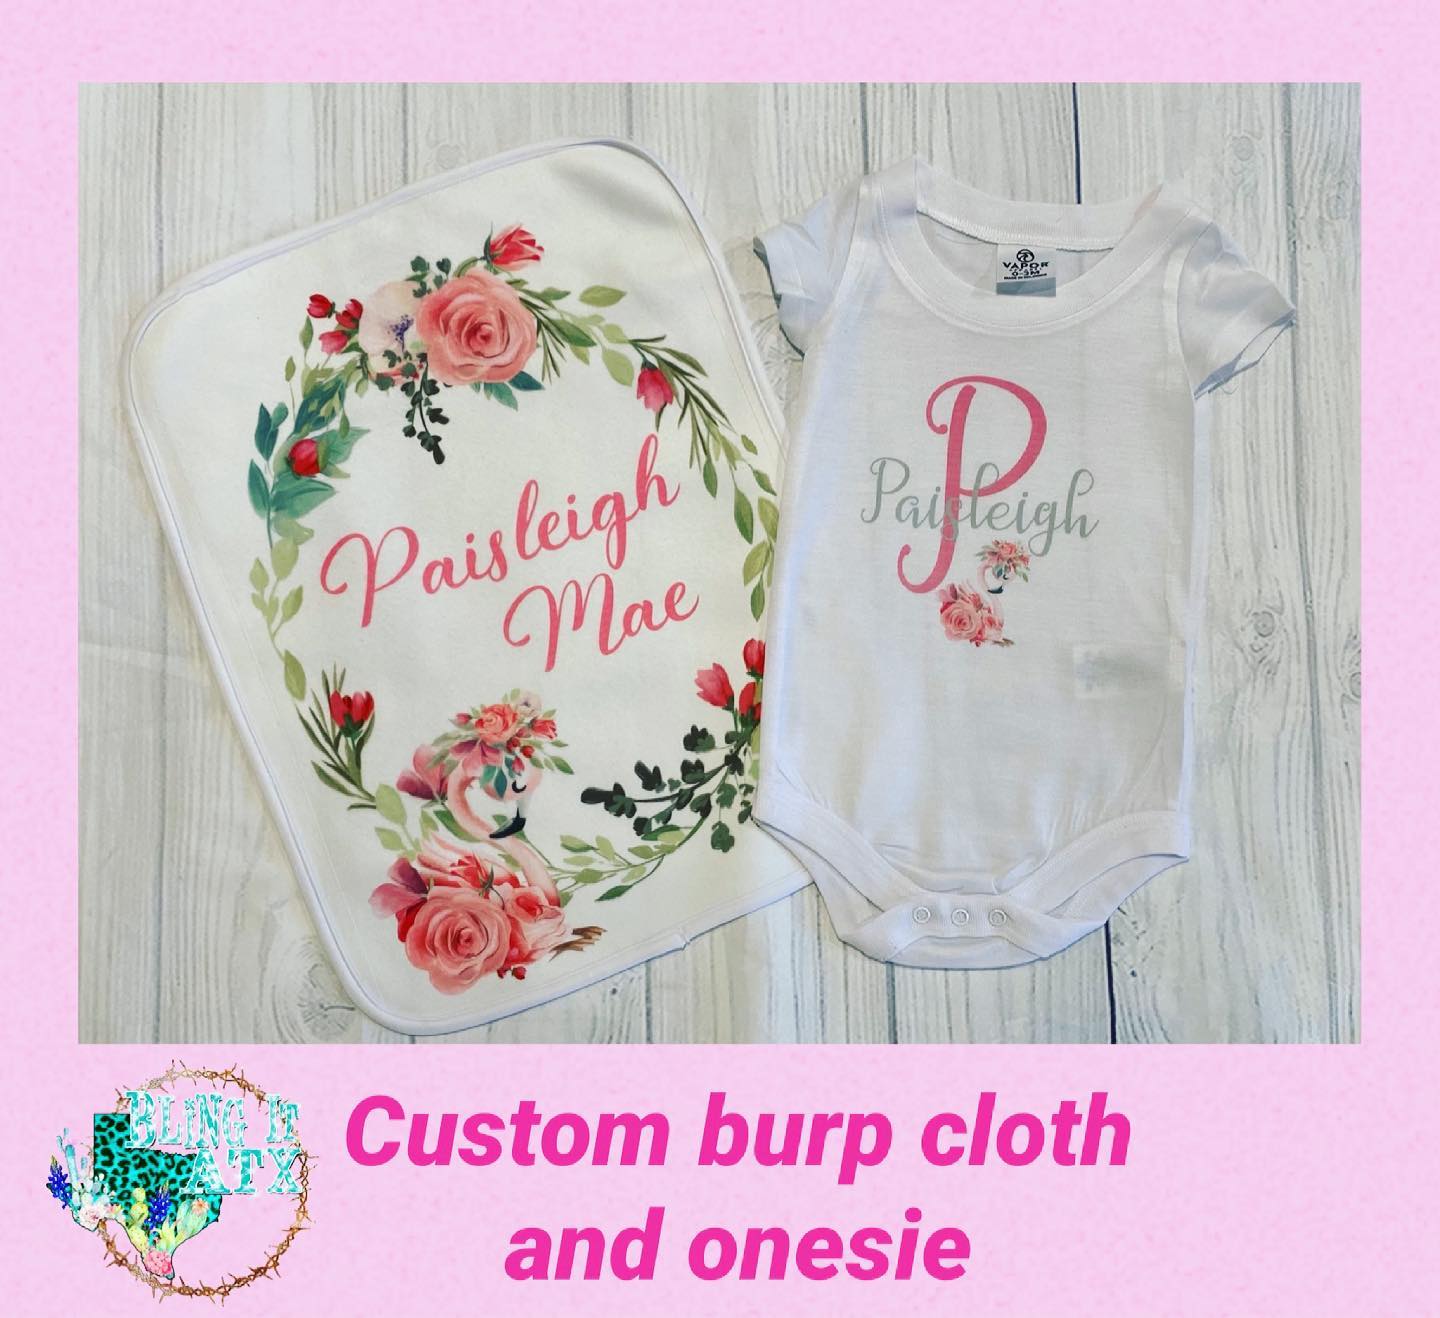 Designed an adorable burpcloth and onesie with a beautiful wreath and flagmingo.